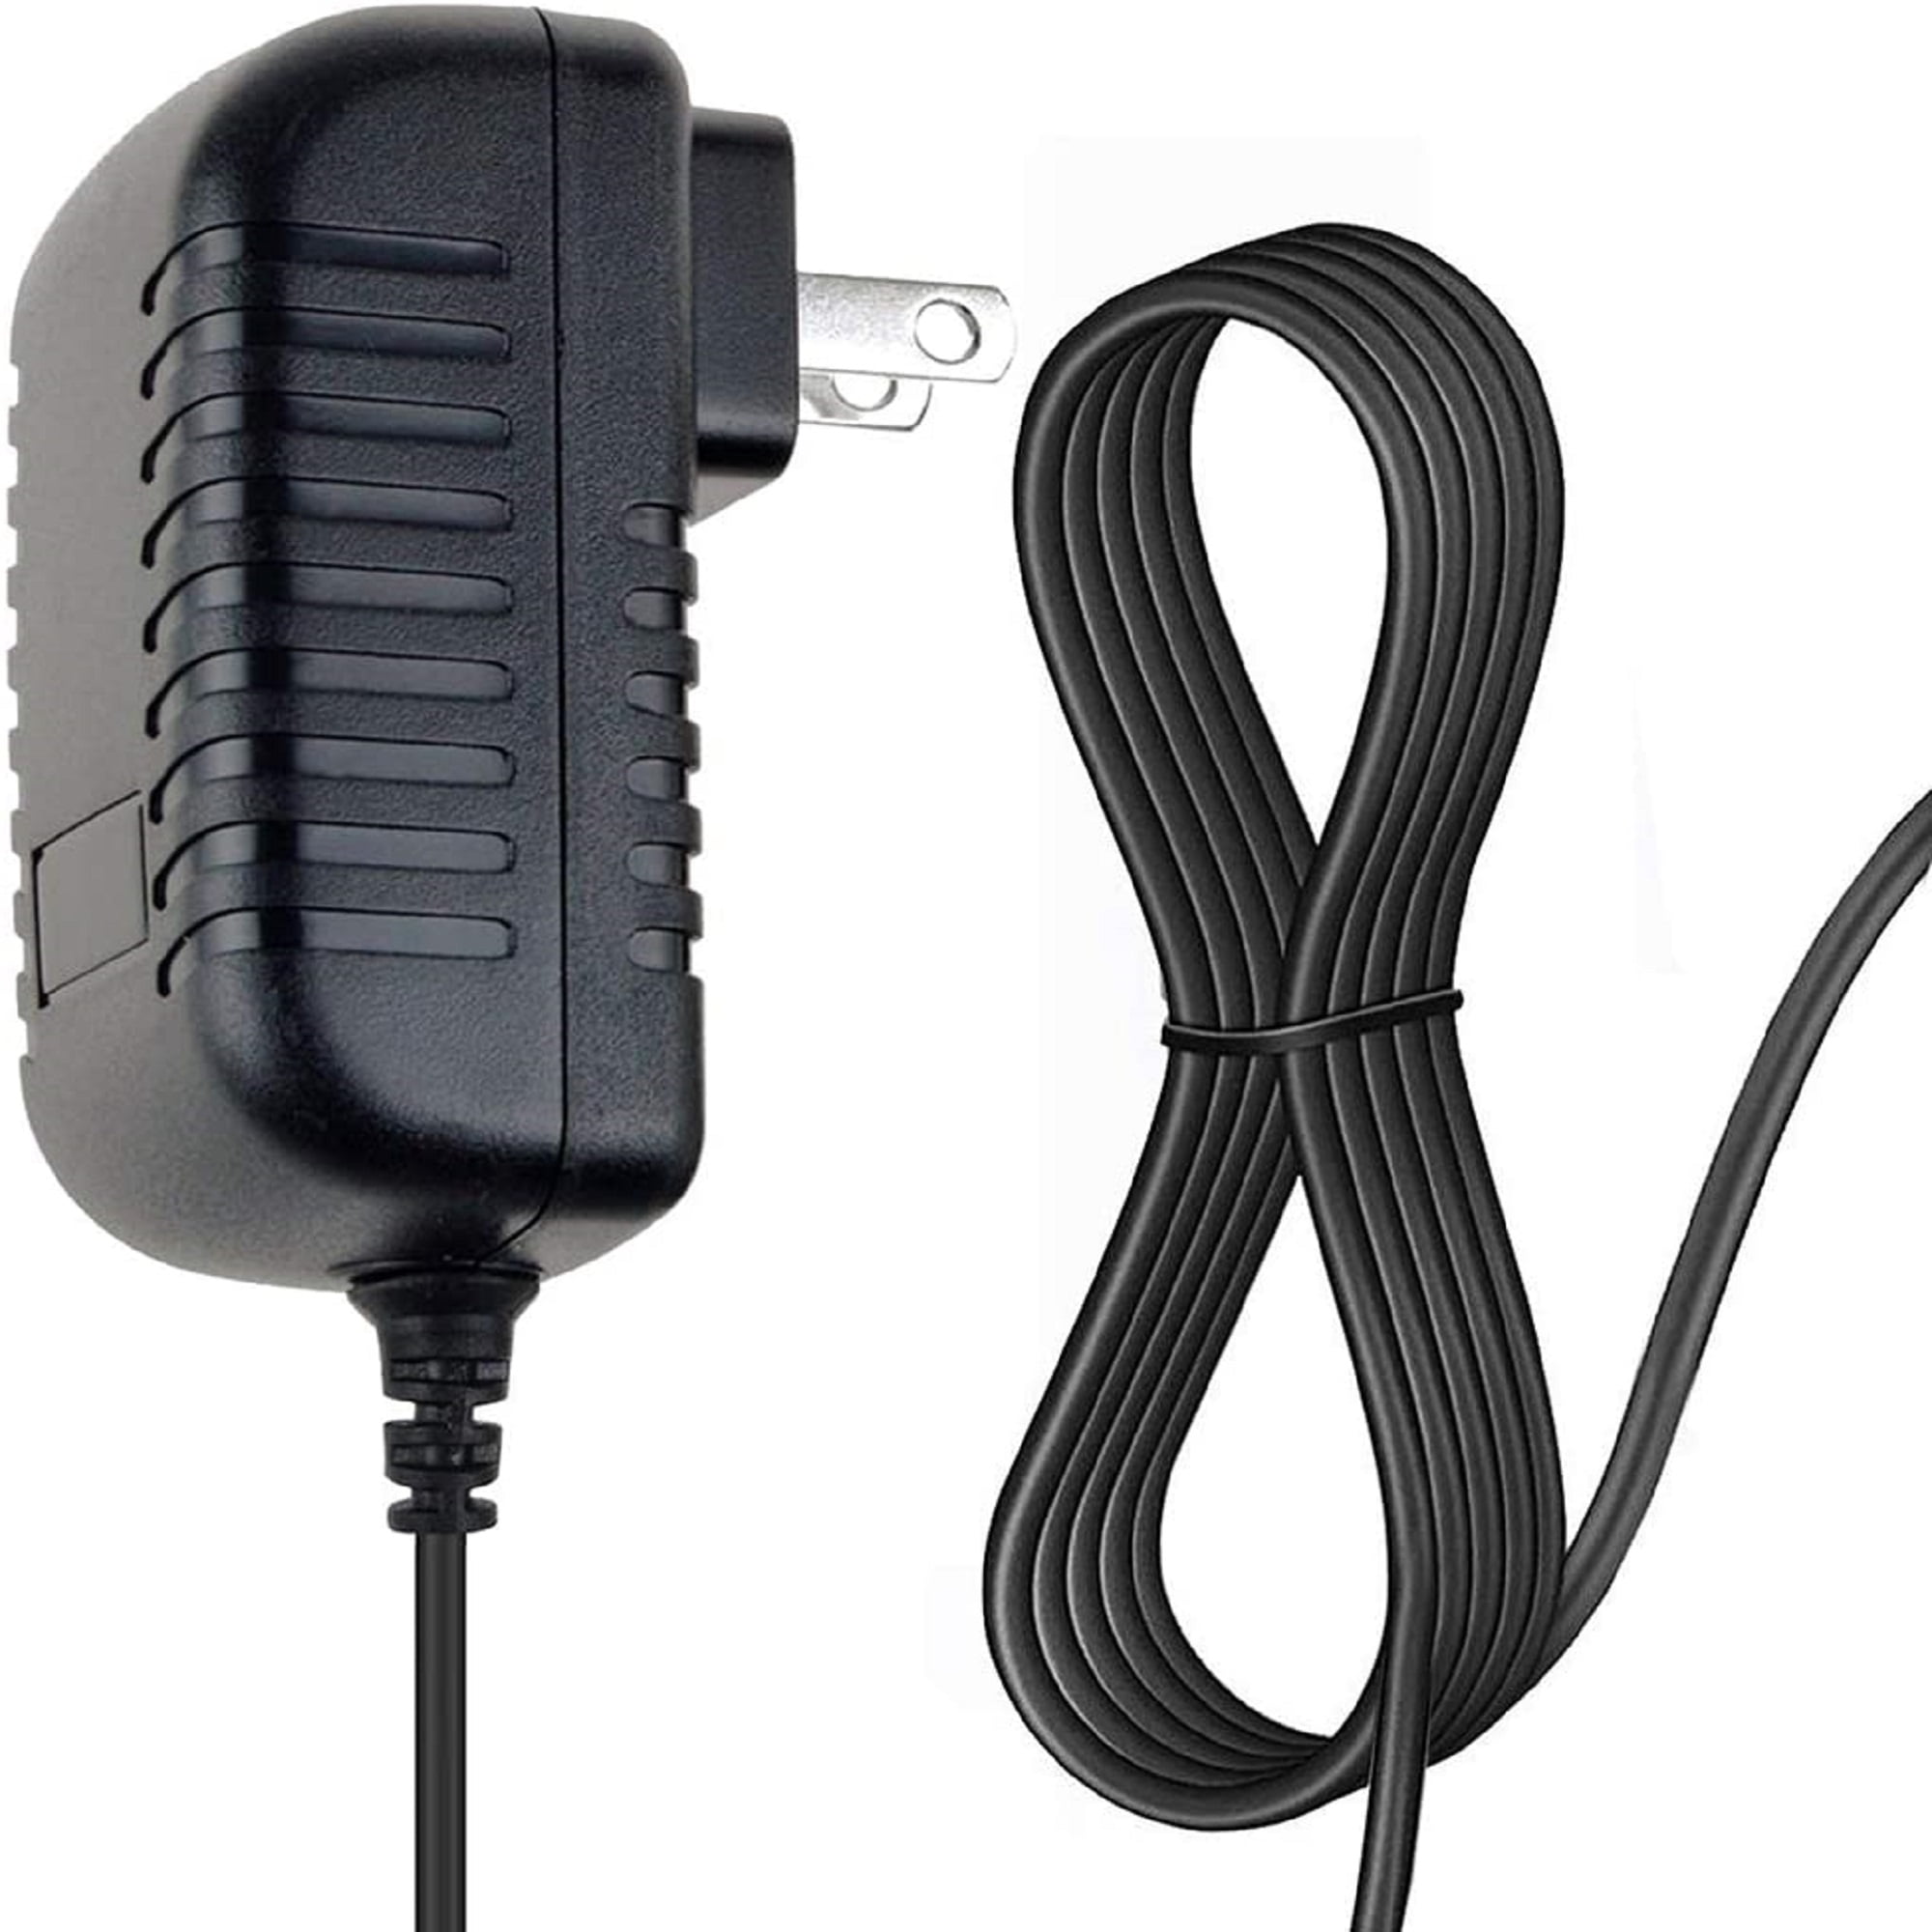 NEW AC Adapter For AR Acoustic Research AW871 AW872 AW880 AW877 Wireless Speaker 